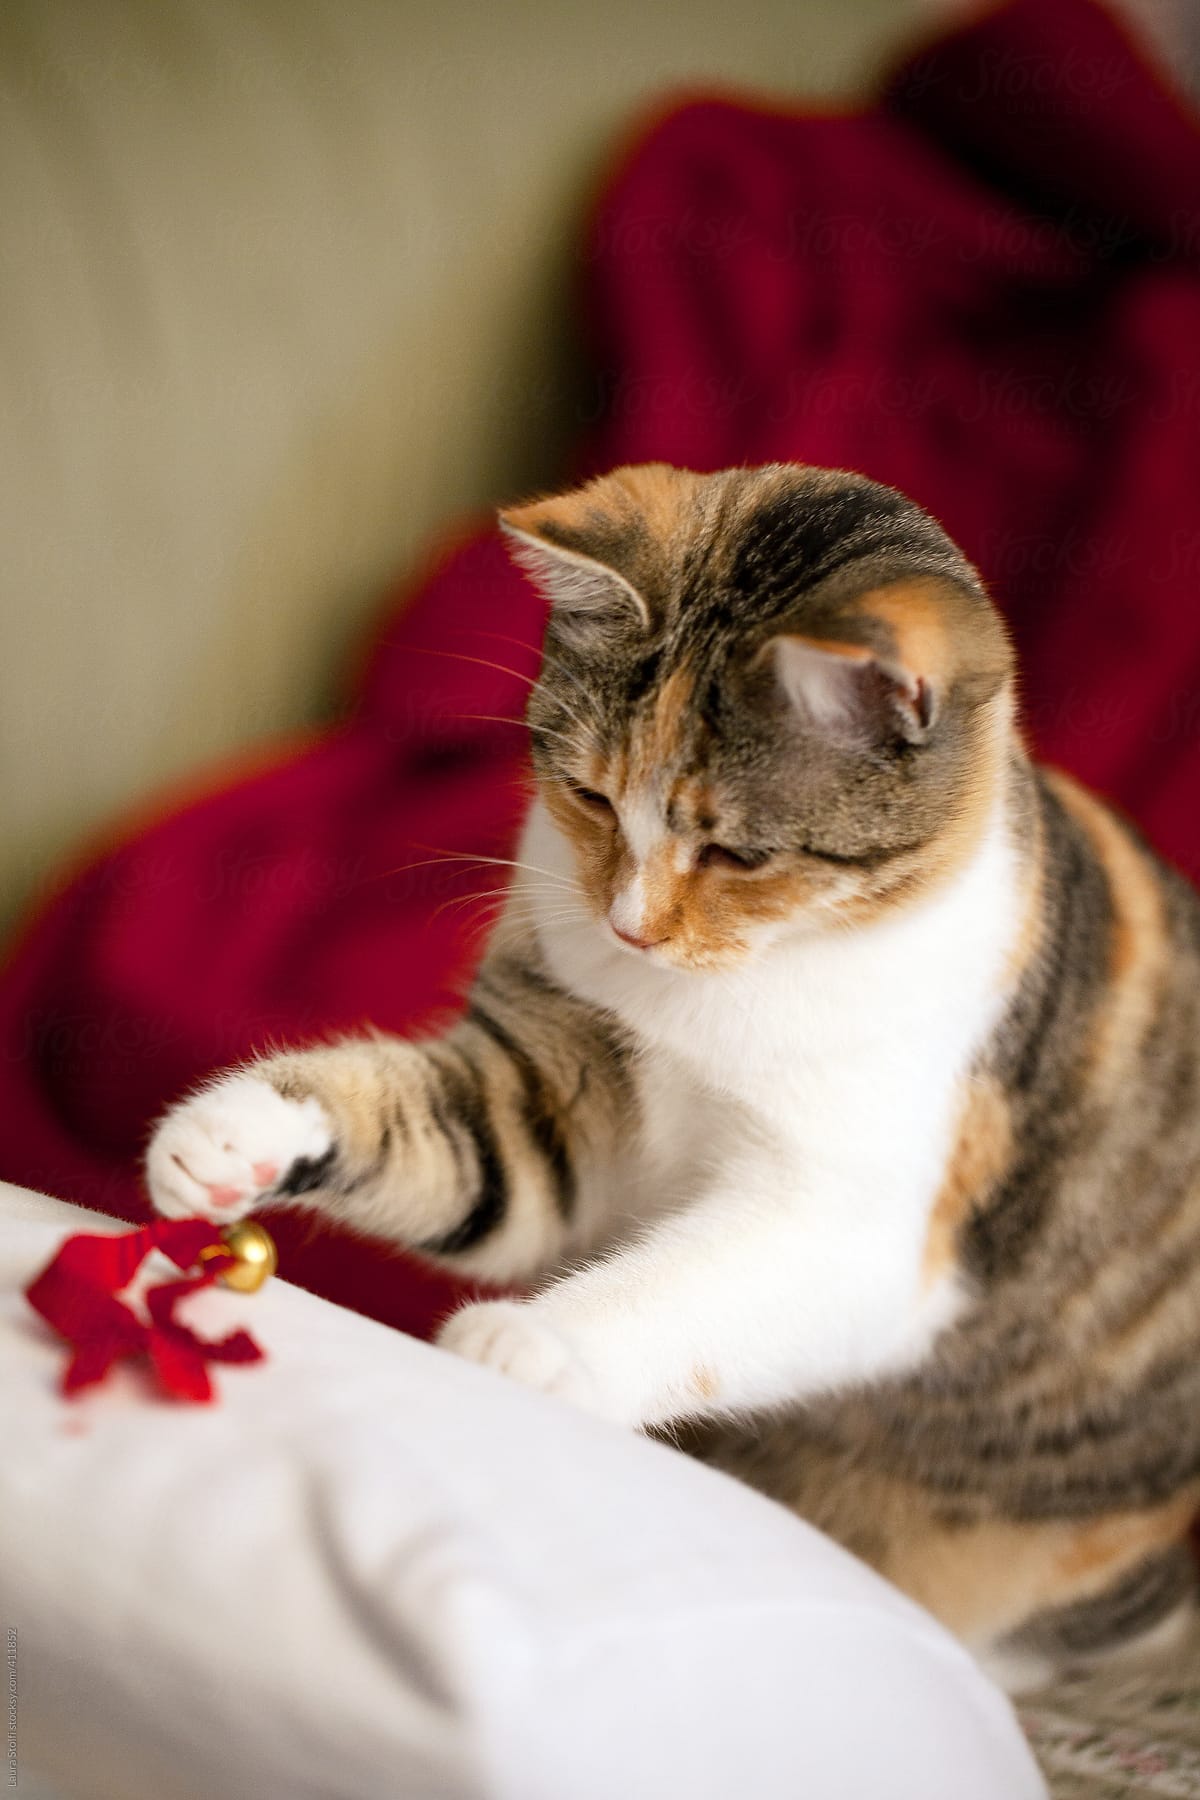 Calico cat plays with red ribbon on armchair